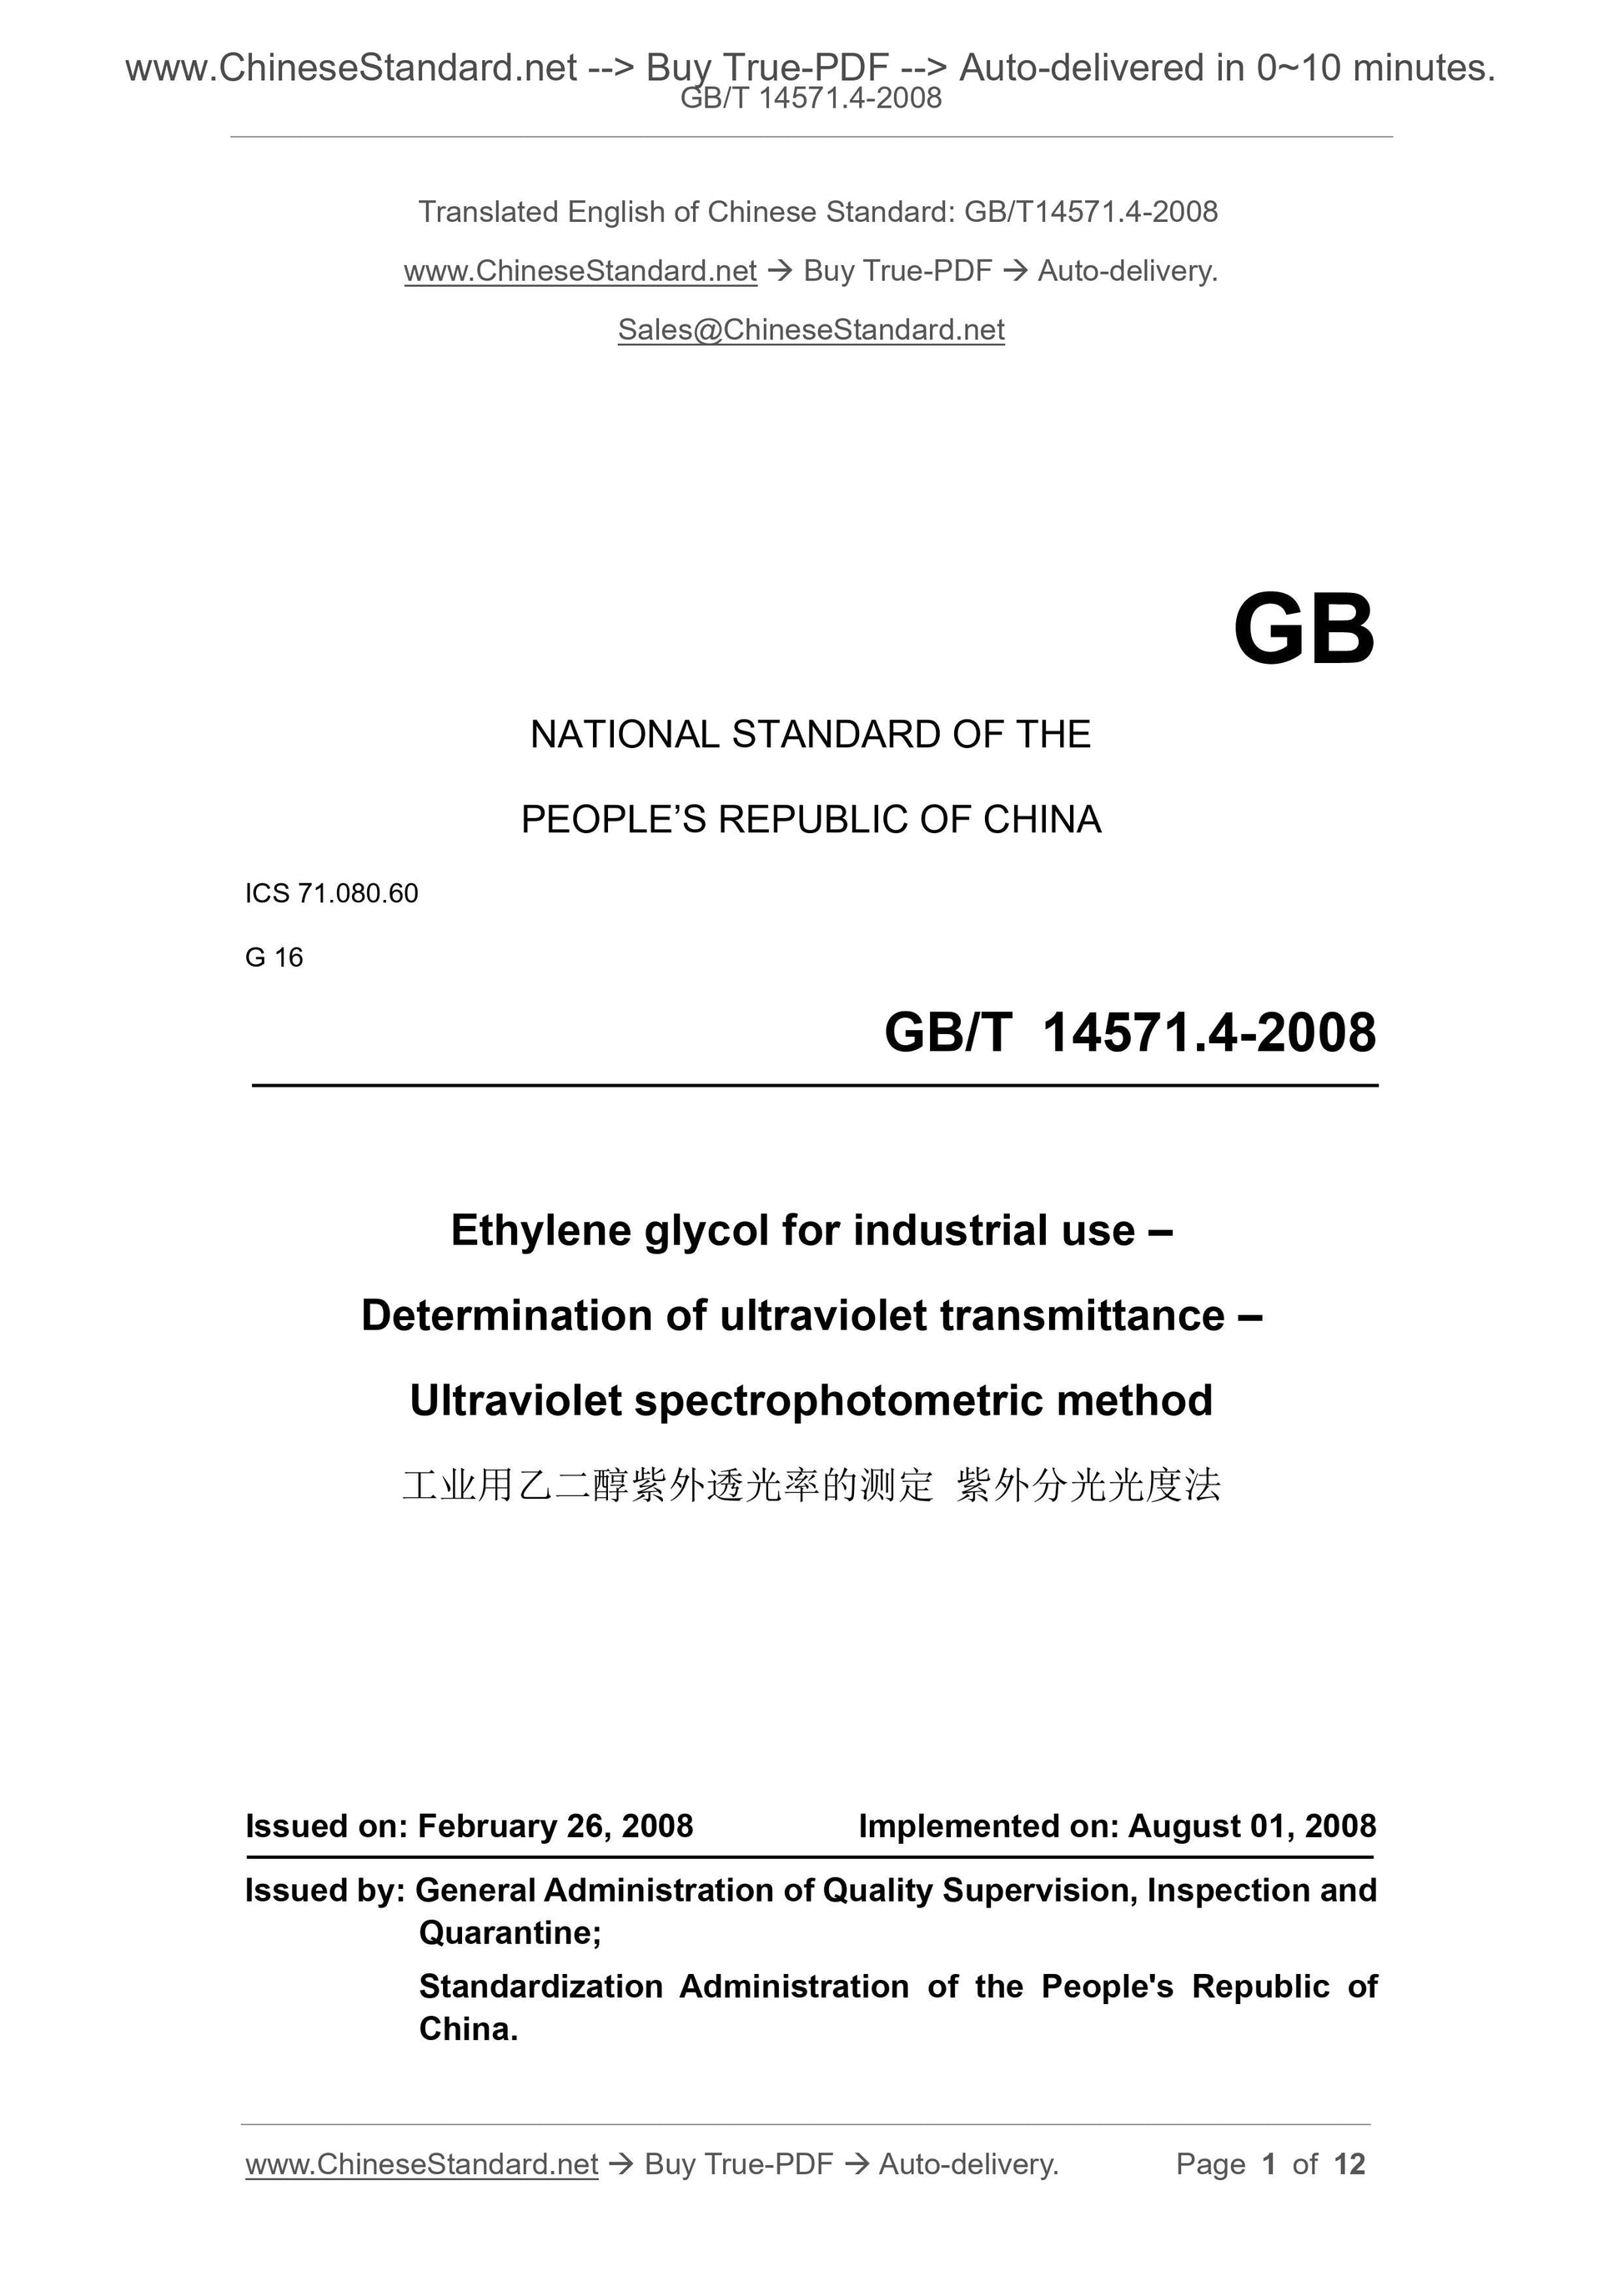 GB/T 14571.4-2008 Page 1